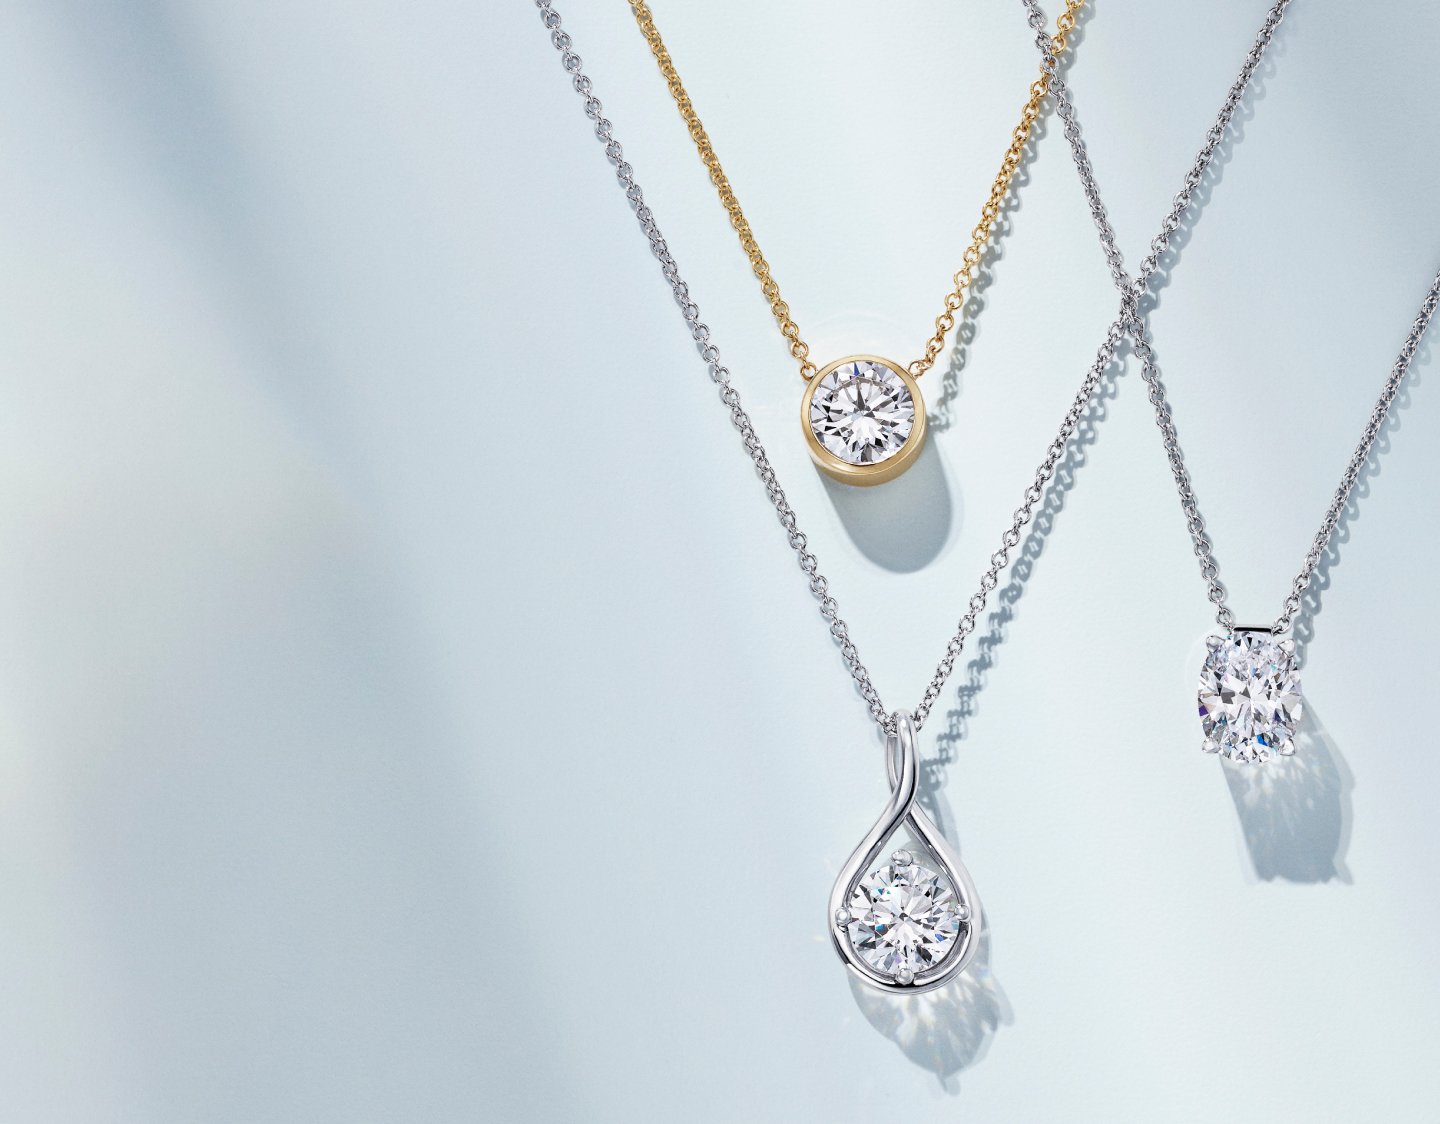 Assortment of gold diamond necklaces.